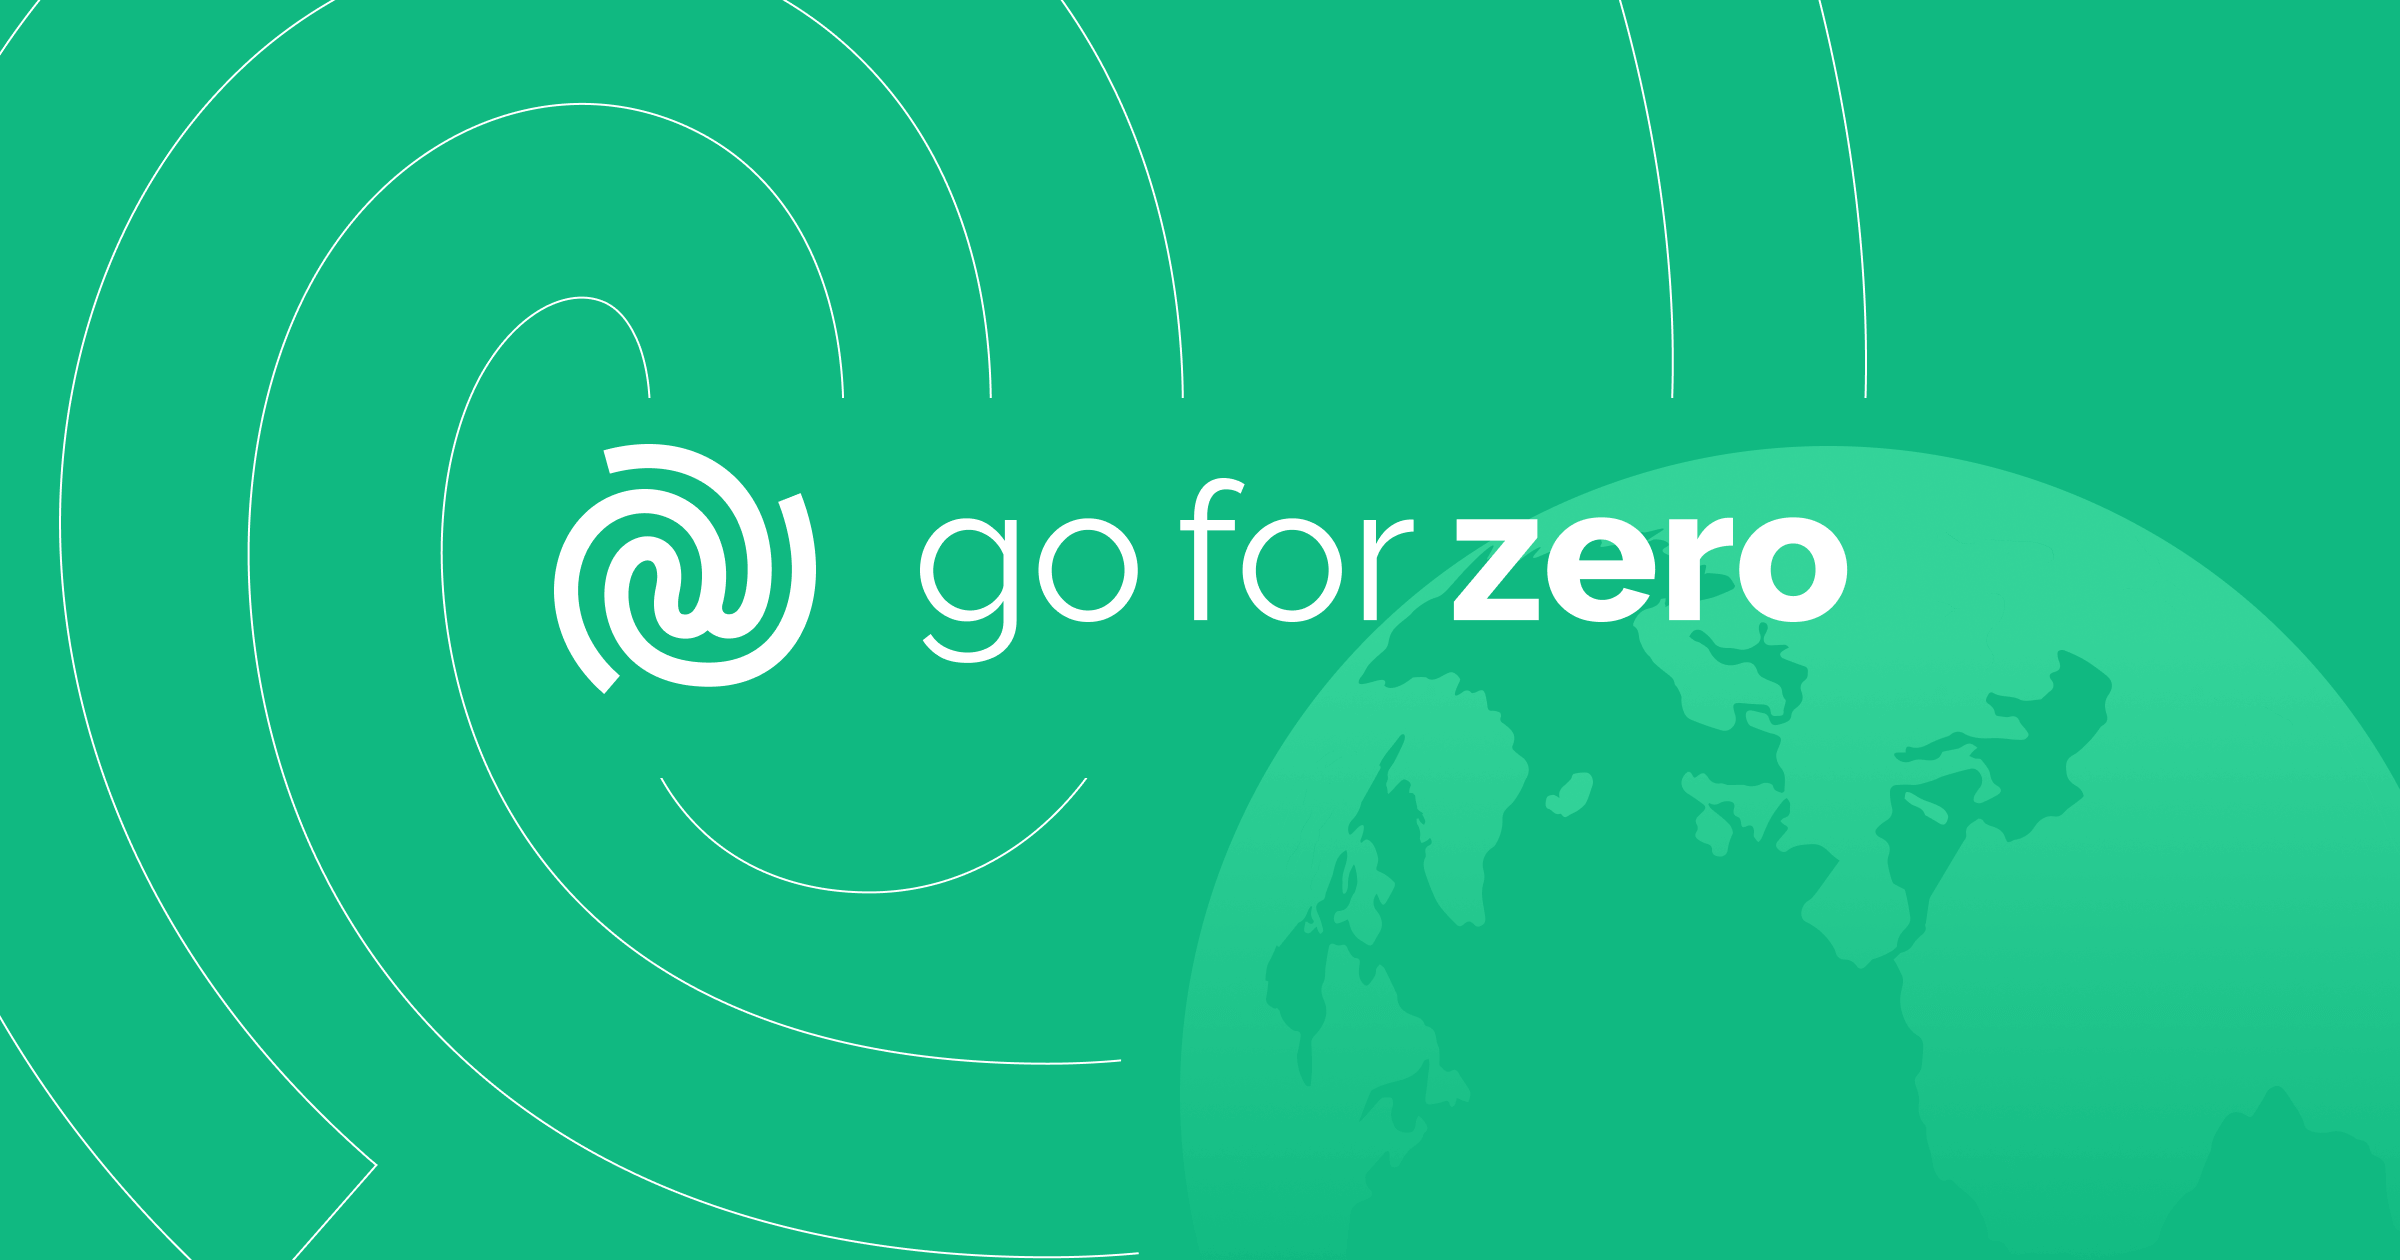 How Go For Zero launched its own brand with sustainability at the forefront